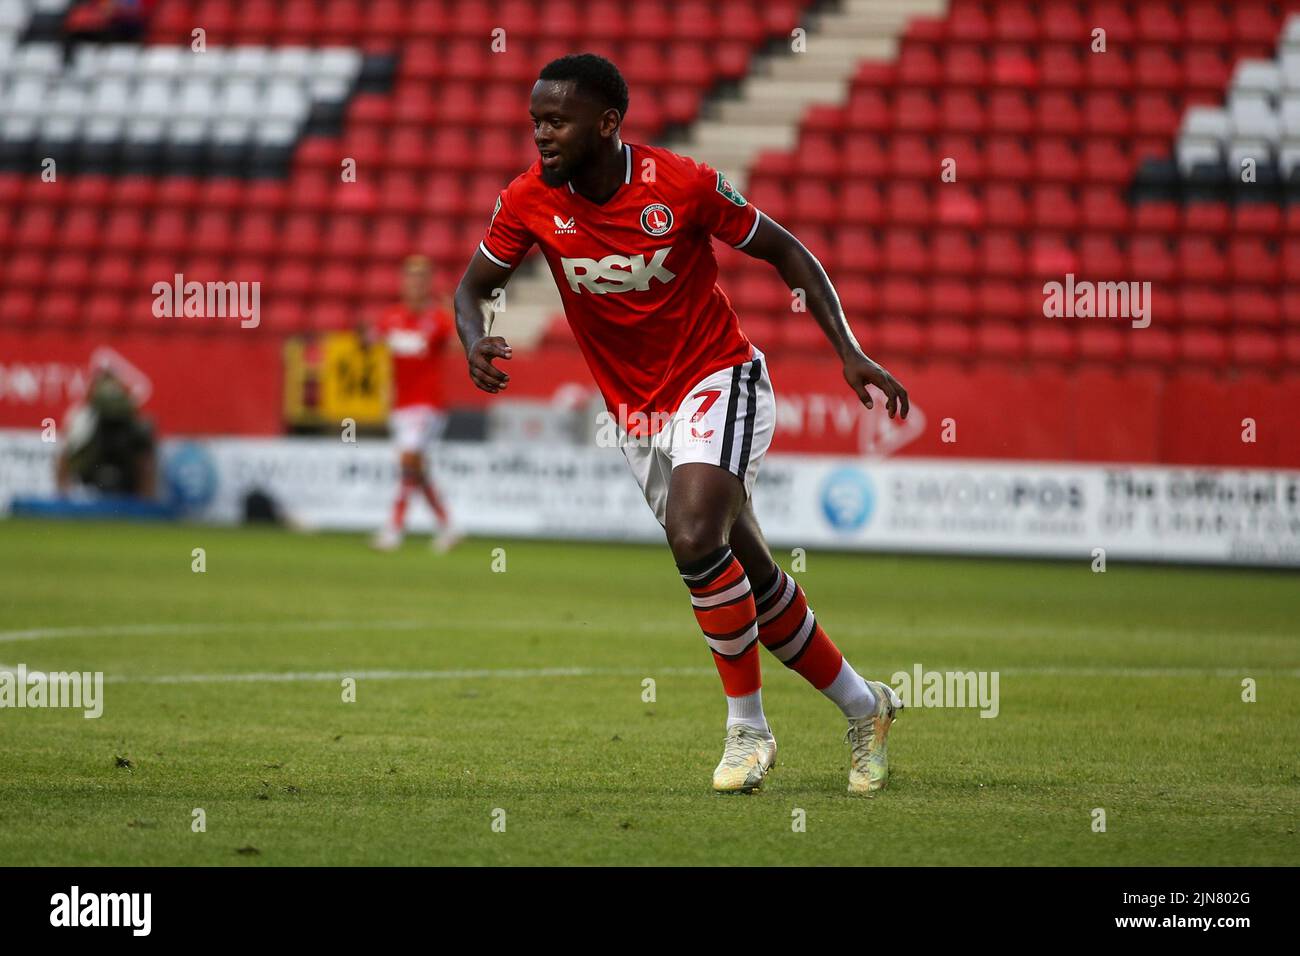 The Valley, London on Tuesday 9th August 2022. Diallang Jaiyesimi of Charlton Athletic during the Carabao Cup match between Charlton Athletic and Queens Park Rangers at The Valley, London on Tuesday 9th August 2022. (Credit: Tom West | MI News) Credit: MI News & Sport /Alamy Live News Stock Photo